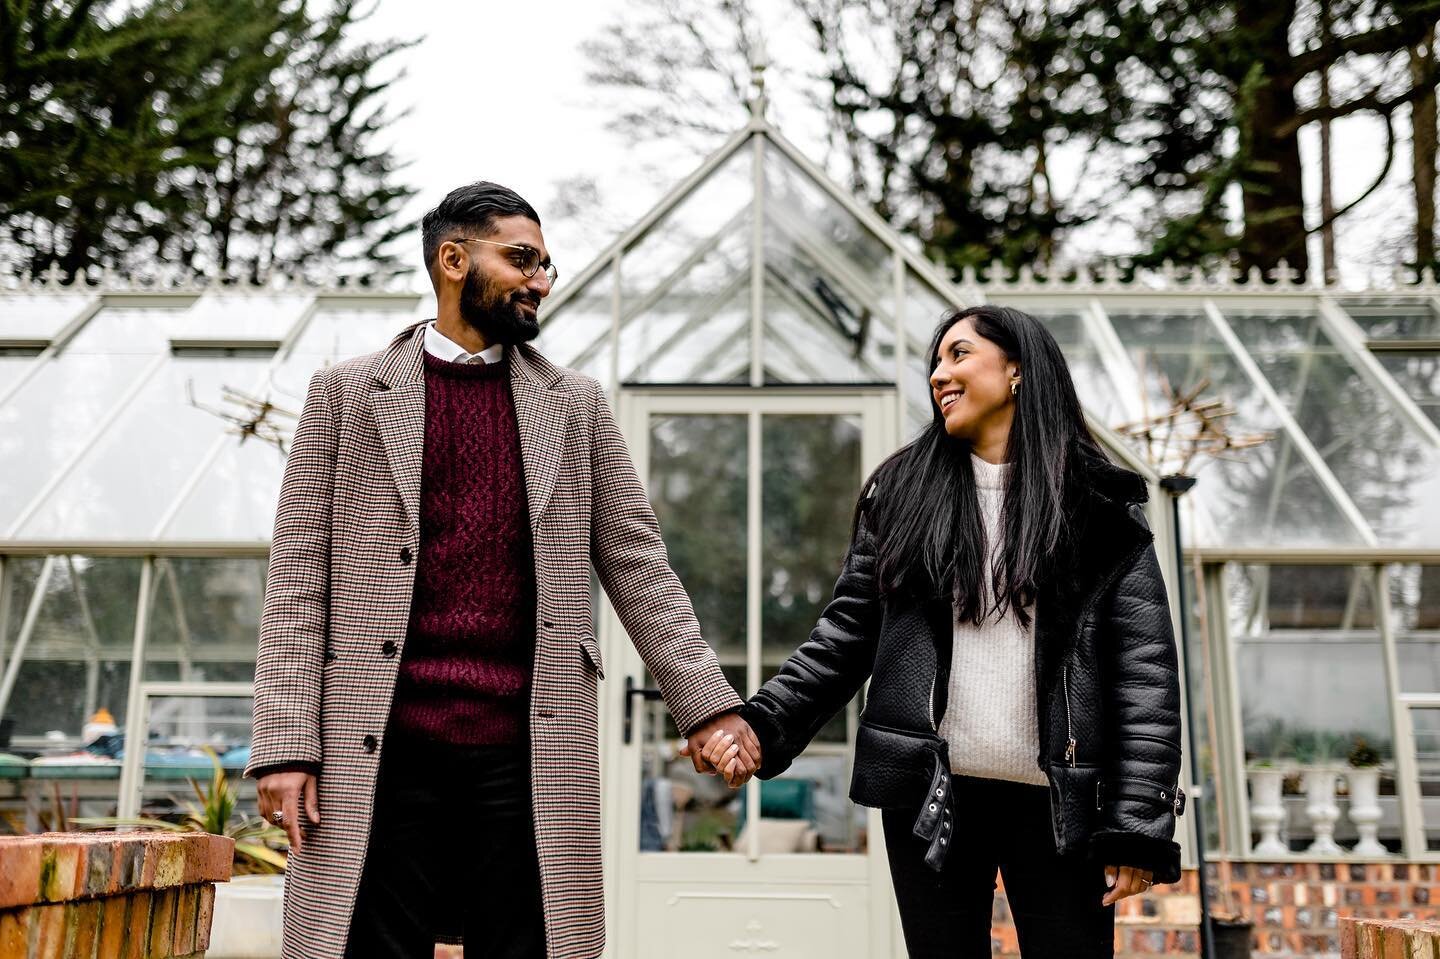 I had a great time yesterday meeting up with Sunny &amp; Jayna for their pre-wedding shoot at @highfield_weddings 

It was great to chat with them about their plans and get a glimpse of the awesome celebration they have in store for their English/ In